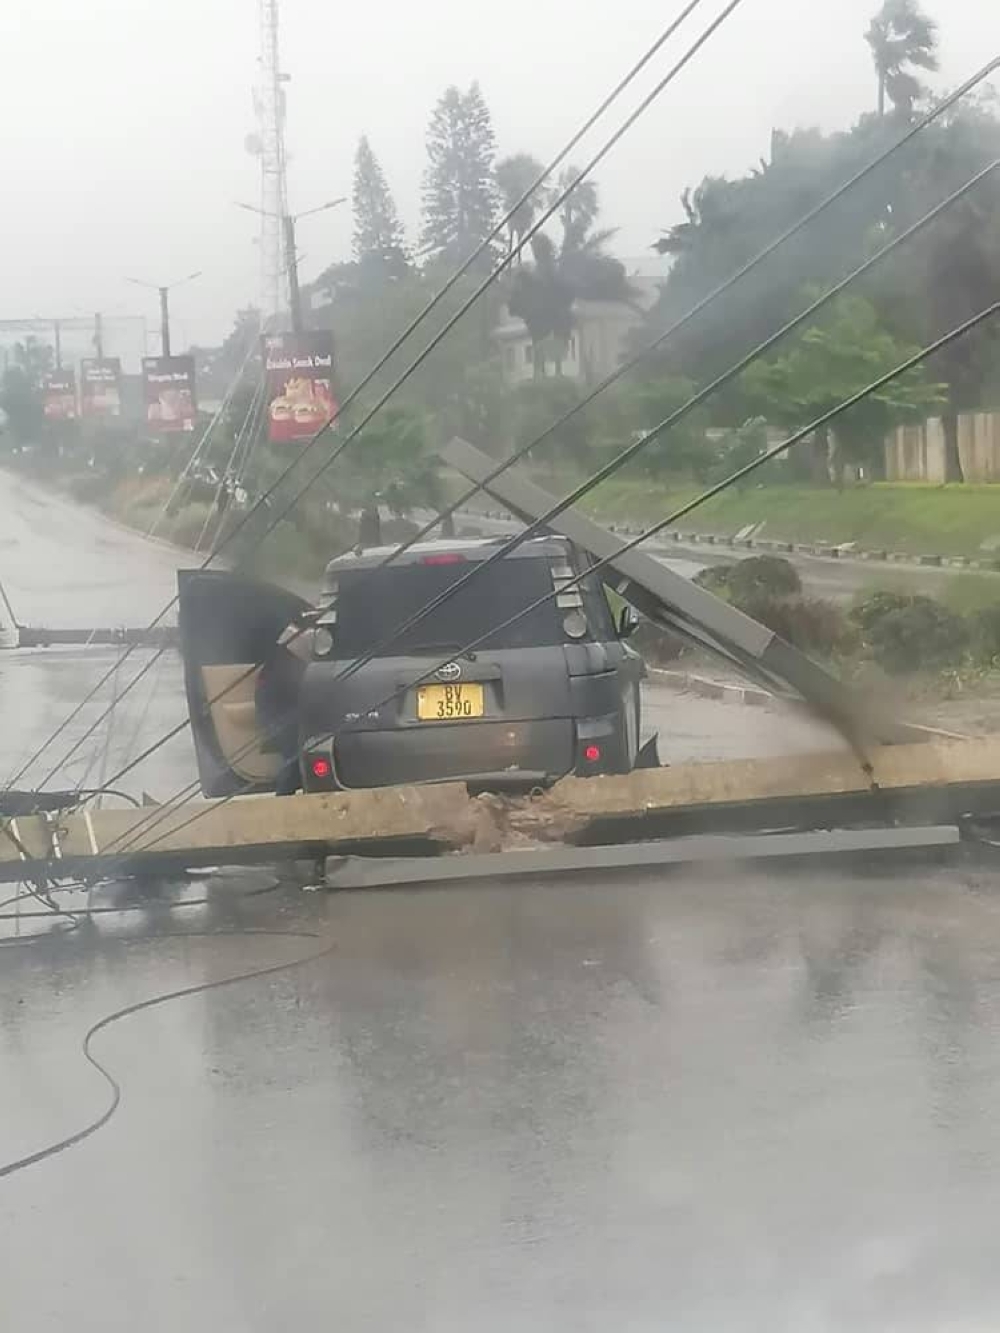 The full extent of the damage and loss of life in Mozambique is not yet clear, as the power supply and phone signals were cut off in the affected area.